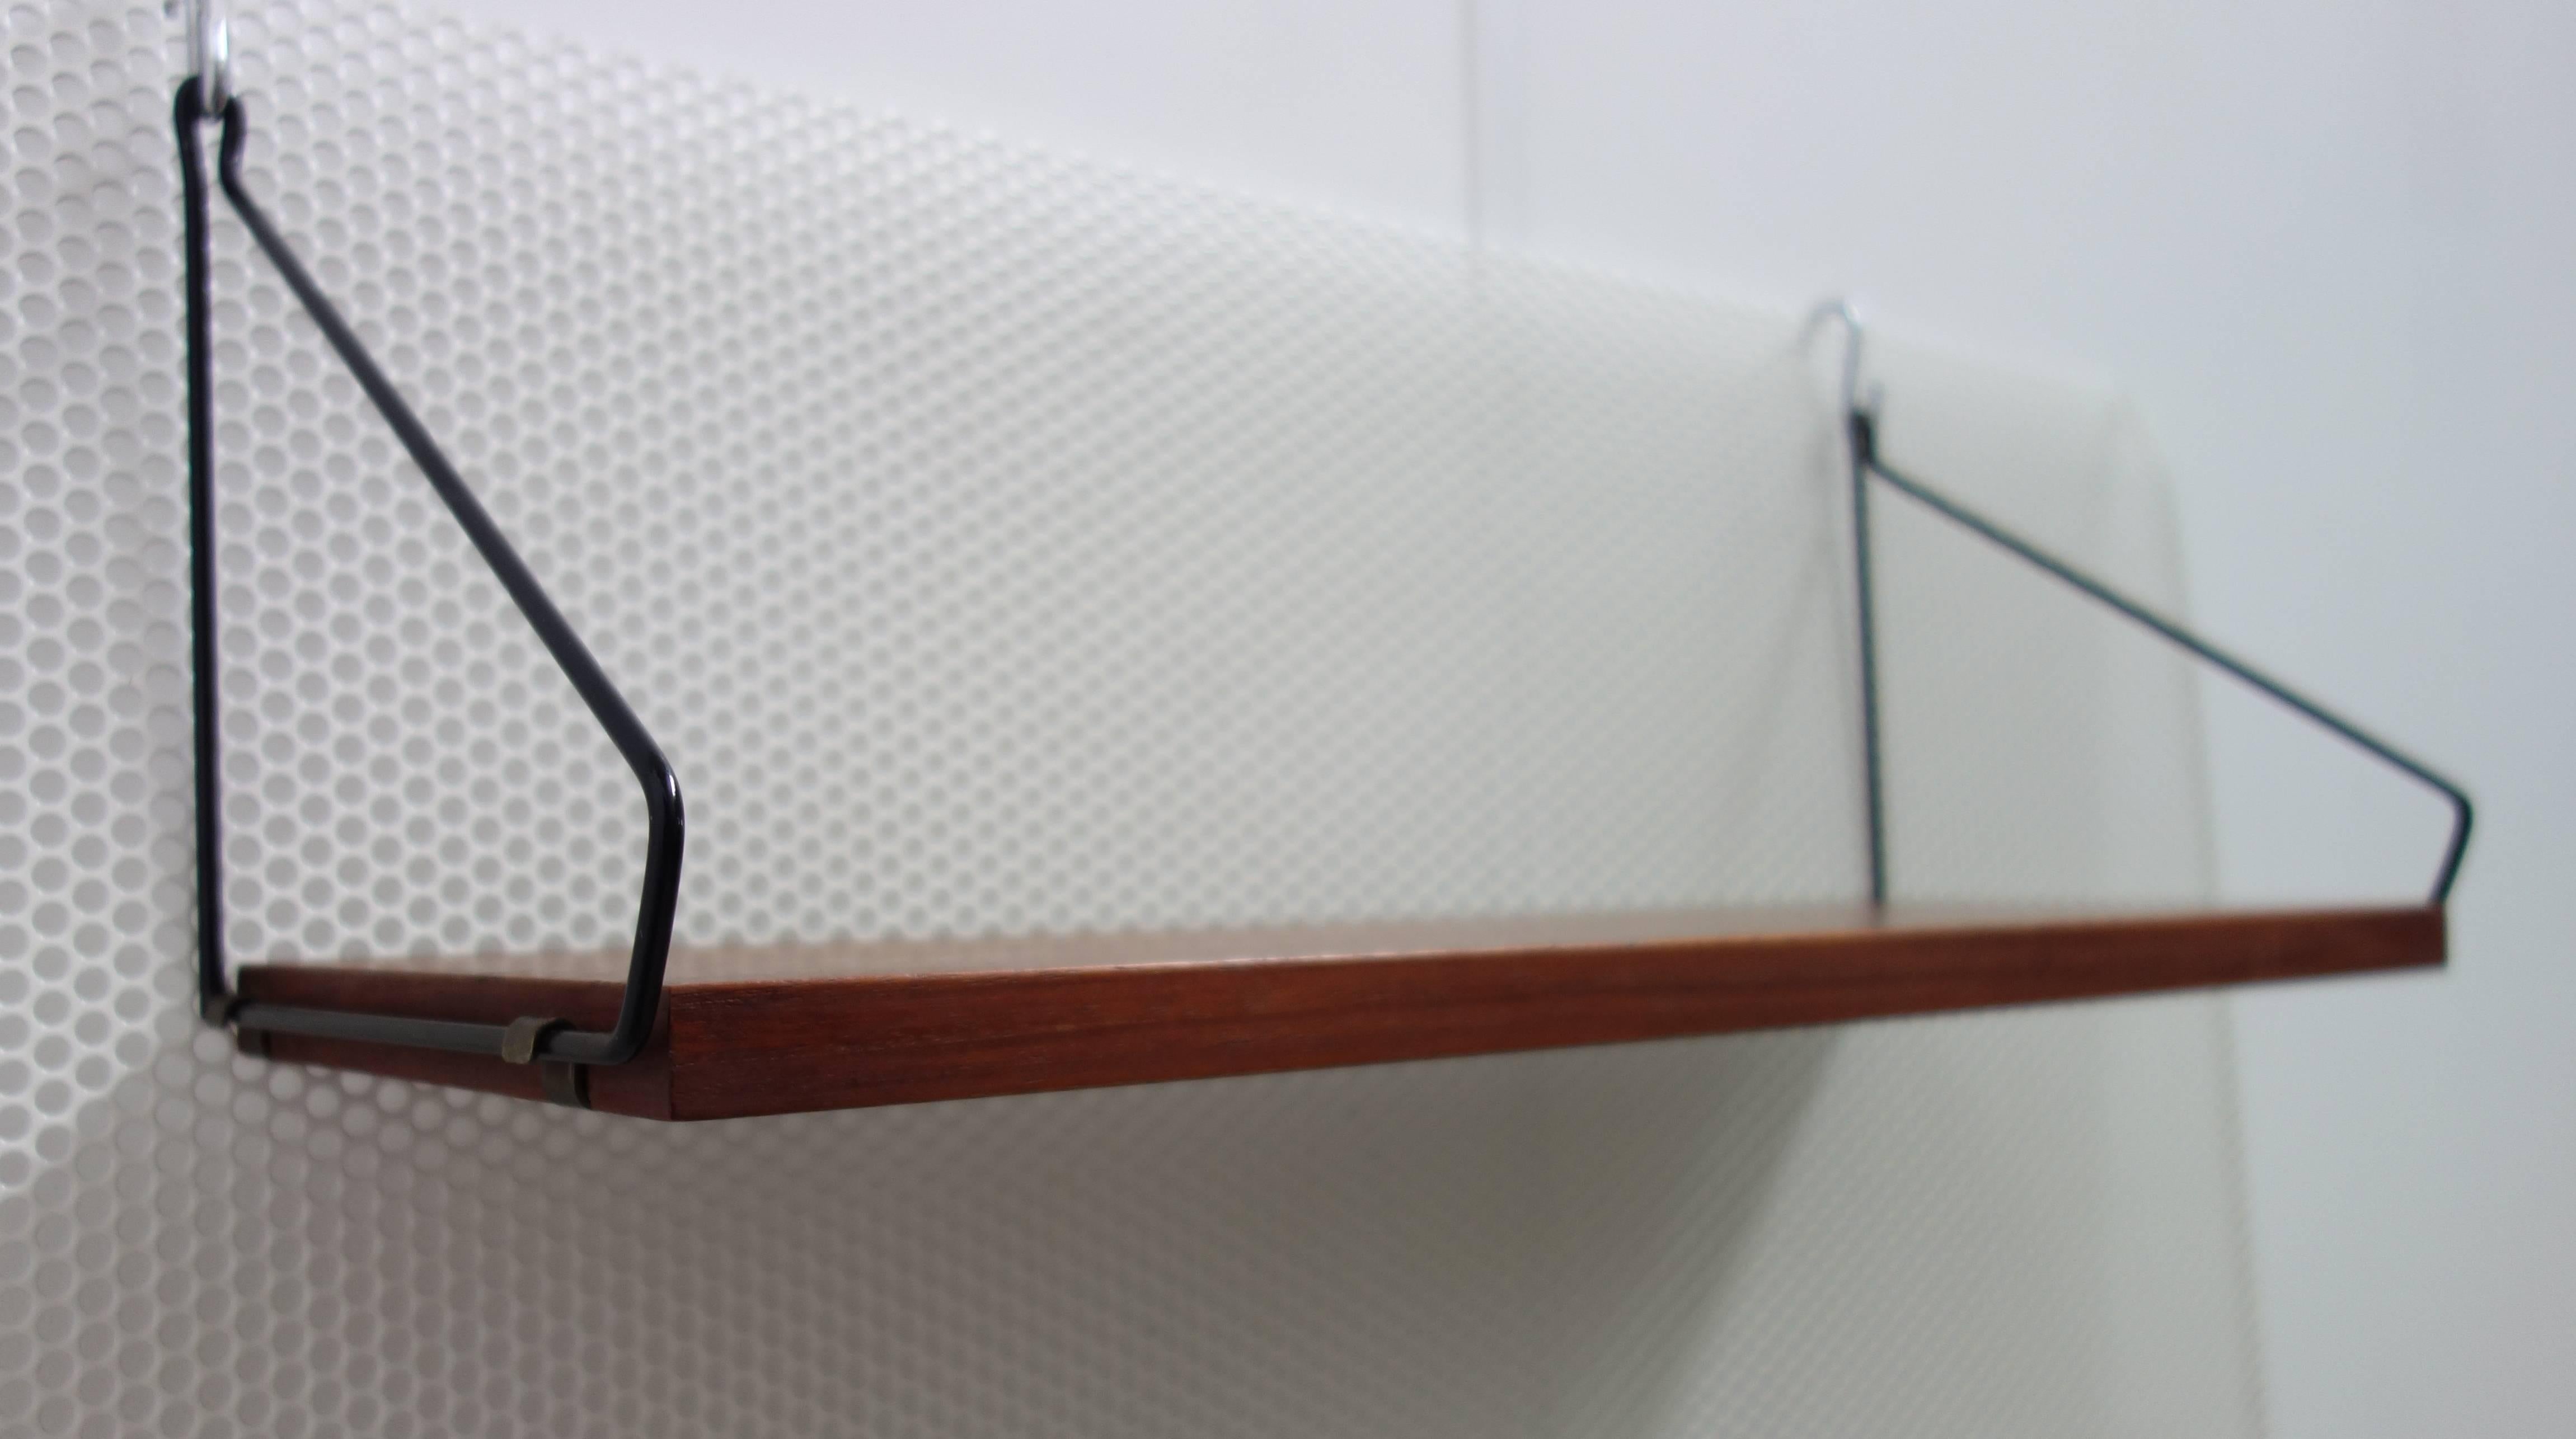 Mono wall shelving system by Nisse Strinning for String Design AB Sweden
Made to fit anywhere
Nisse Strinning designed this famous shelf system in 1949, and it was produced by his own manufacturing company, String Design AB in Sweden. In good